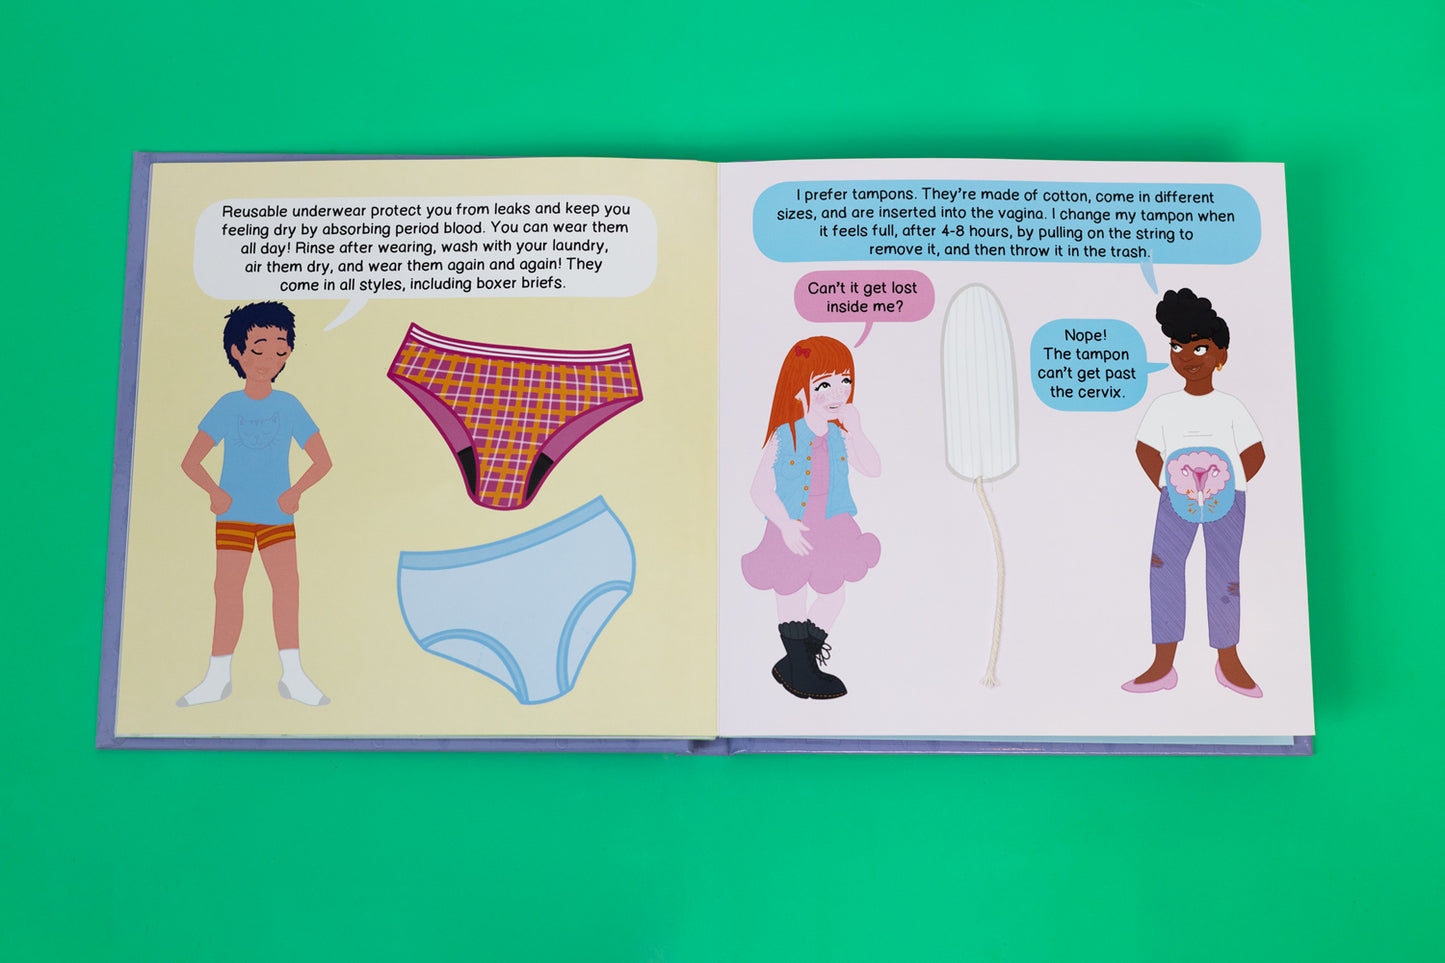 Vaginas and Periods 101 | A Pop-Up Book